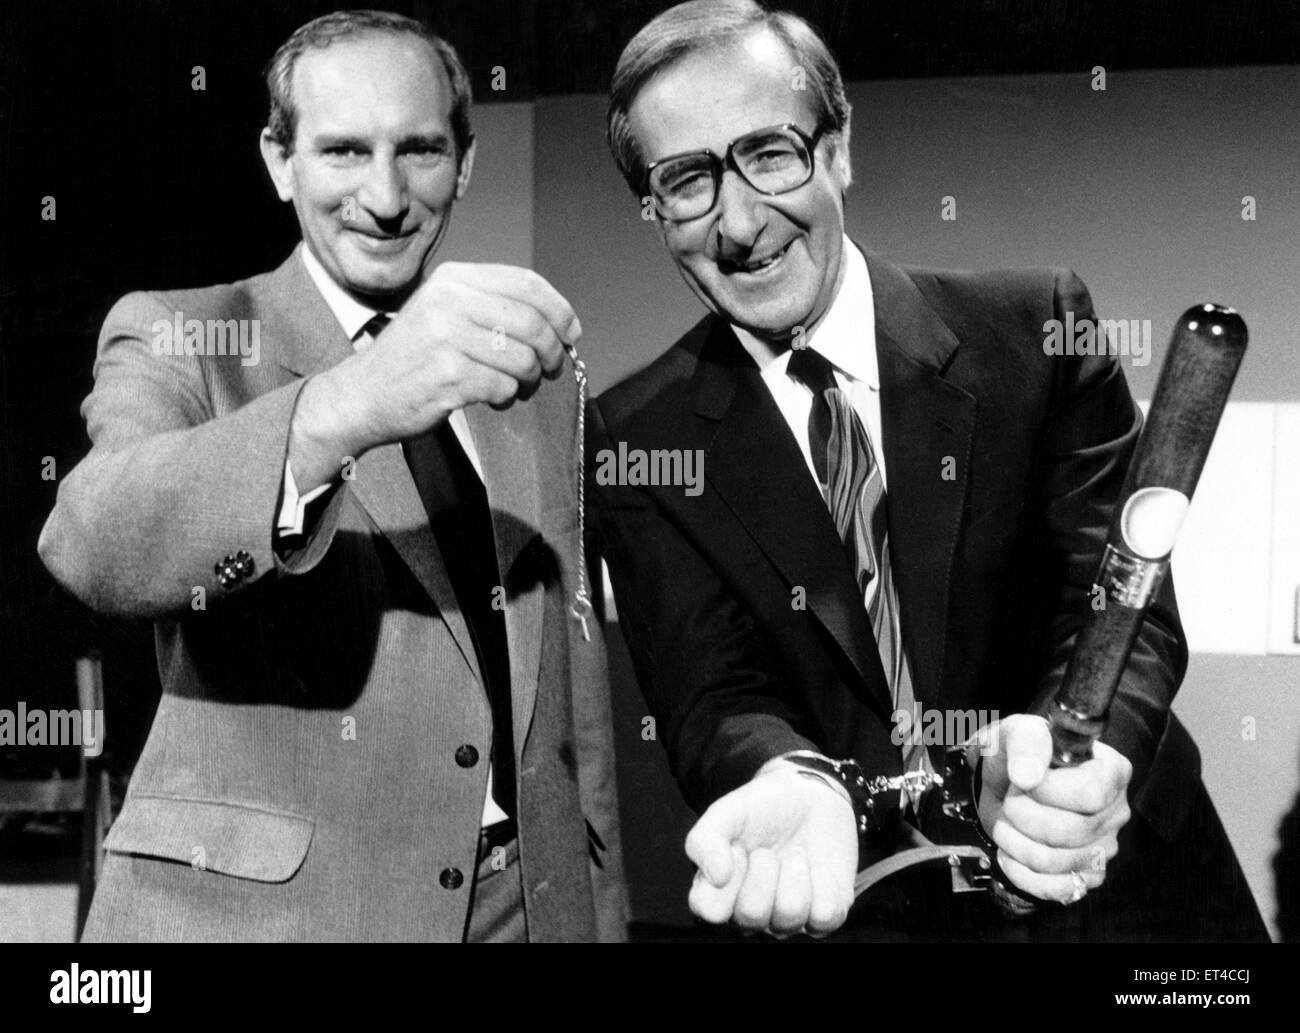 Shaw Taylor MBE, a British actor and television presenter. Best known for presenting Police 5, a long-running 5-minute television programme first broadcast in 1962 that appealed to the public to help solve crimes. 28th July 1982. Stock Photo